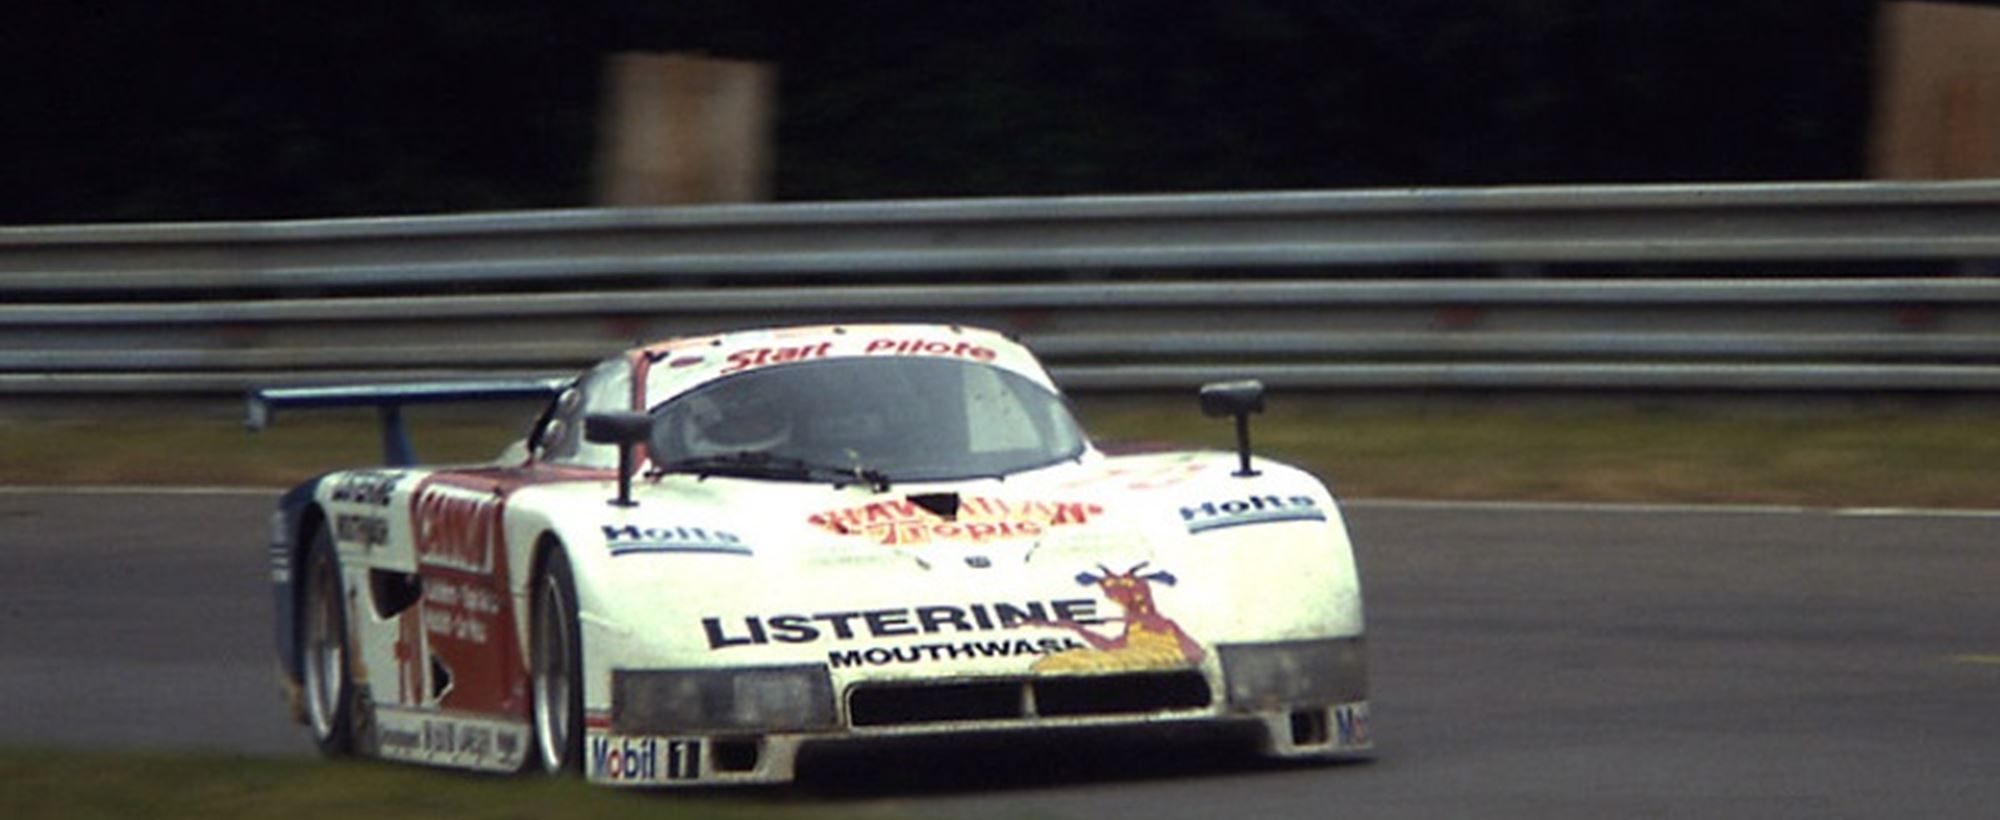 lemans-24-hours-of-le-mans-1986-70-spice-engineering-spice-se86c-ford-gordon-spice-ray-bel.jpg